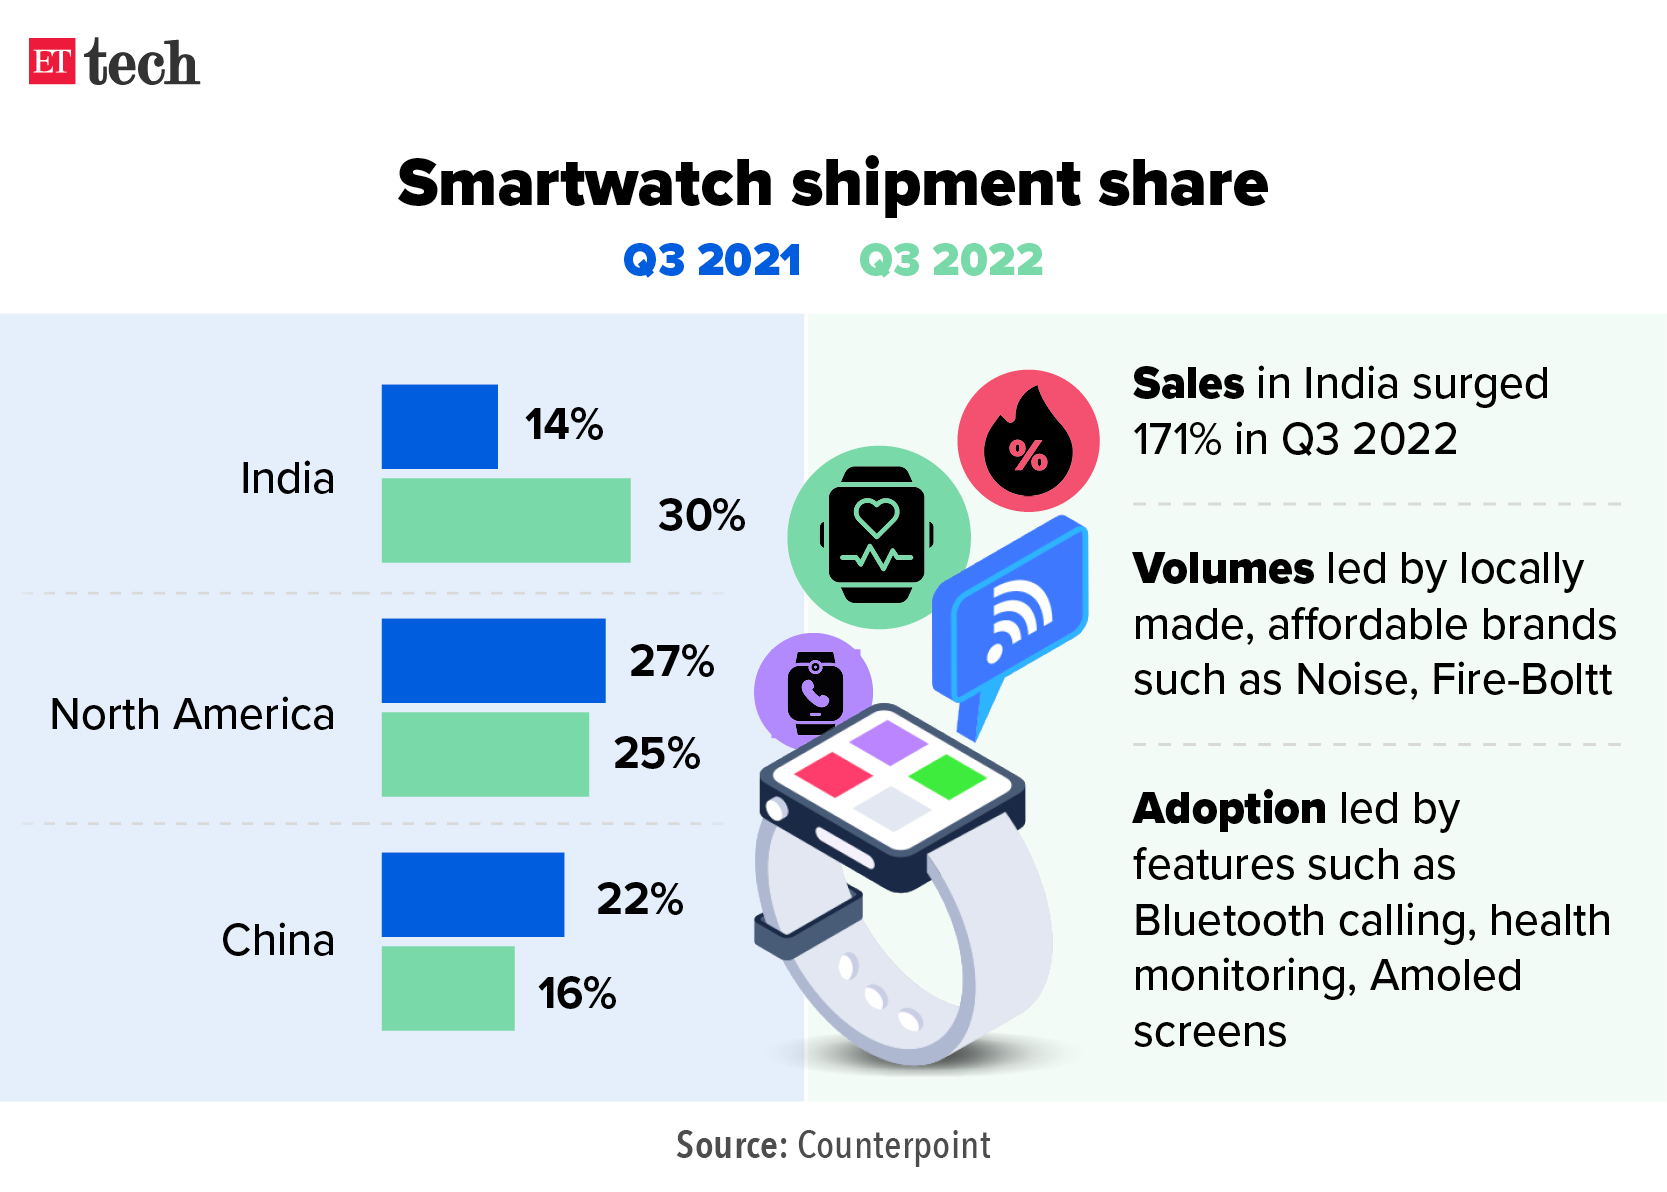 Share of shipments of smart watches